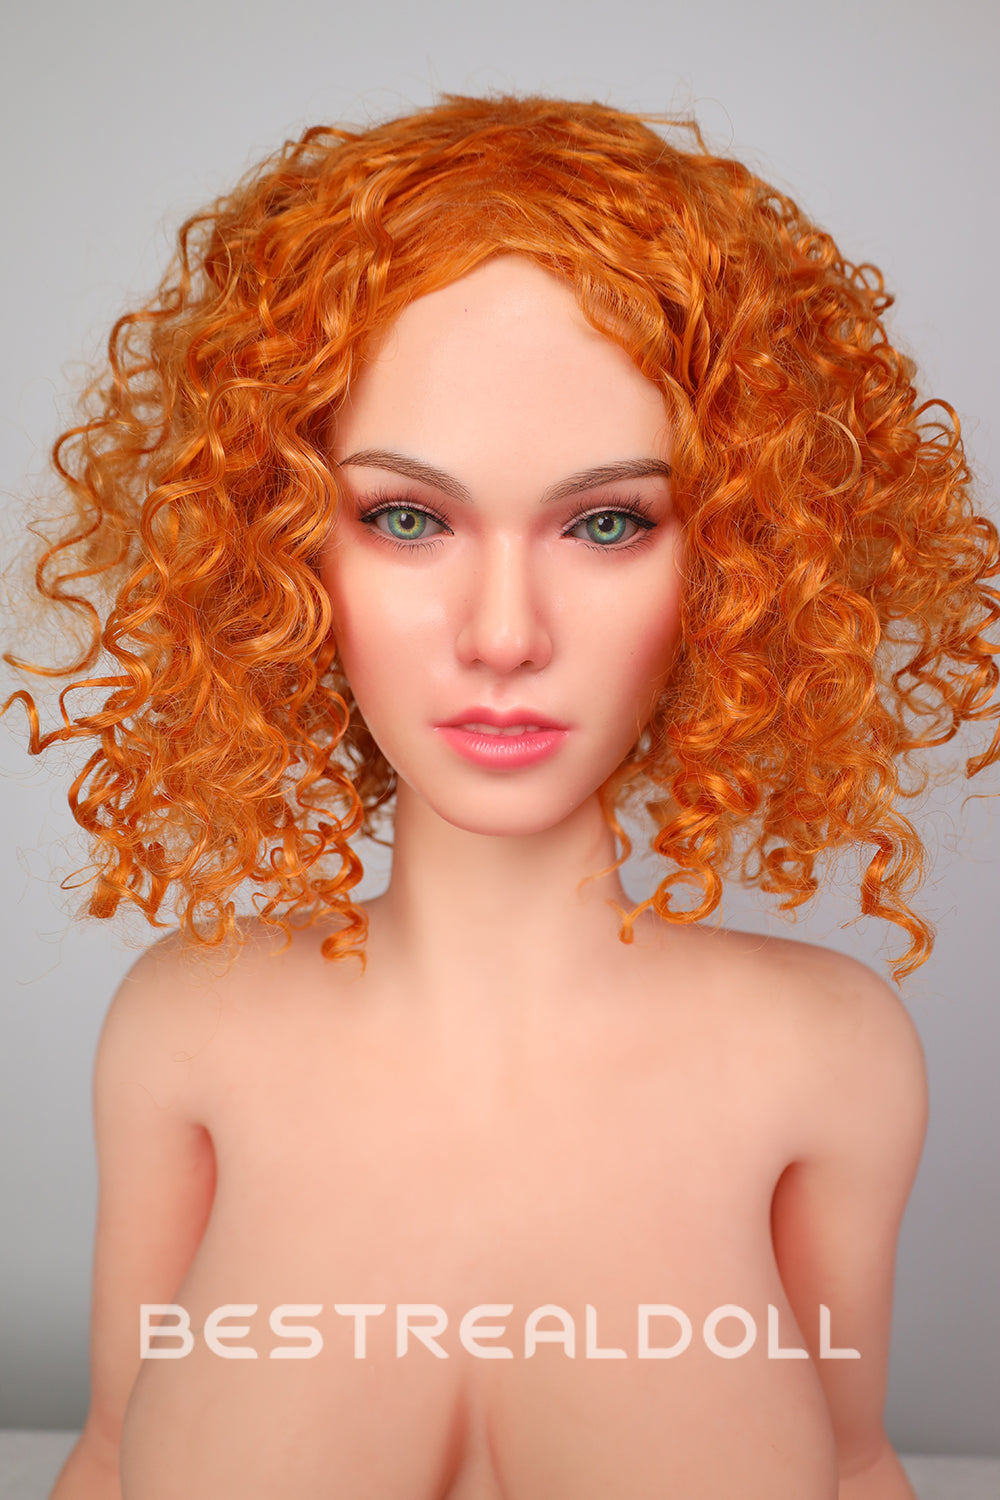 RIDMII Jordi Unique Design Silicone Head European Style Sex Doll TPE Body Jelly Breasts Adult Love Doll with Wig